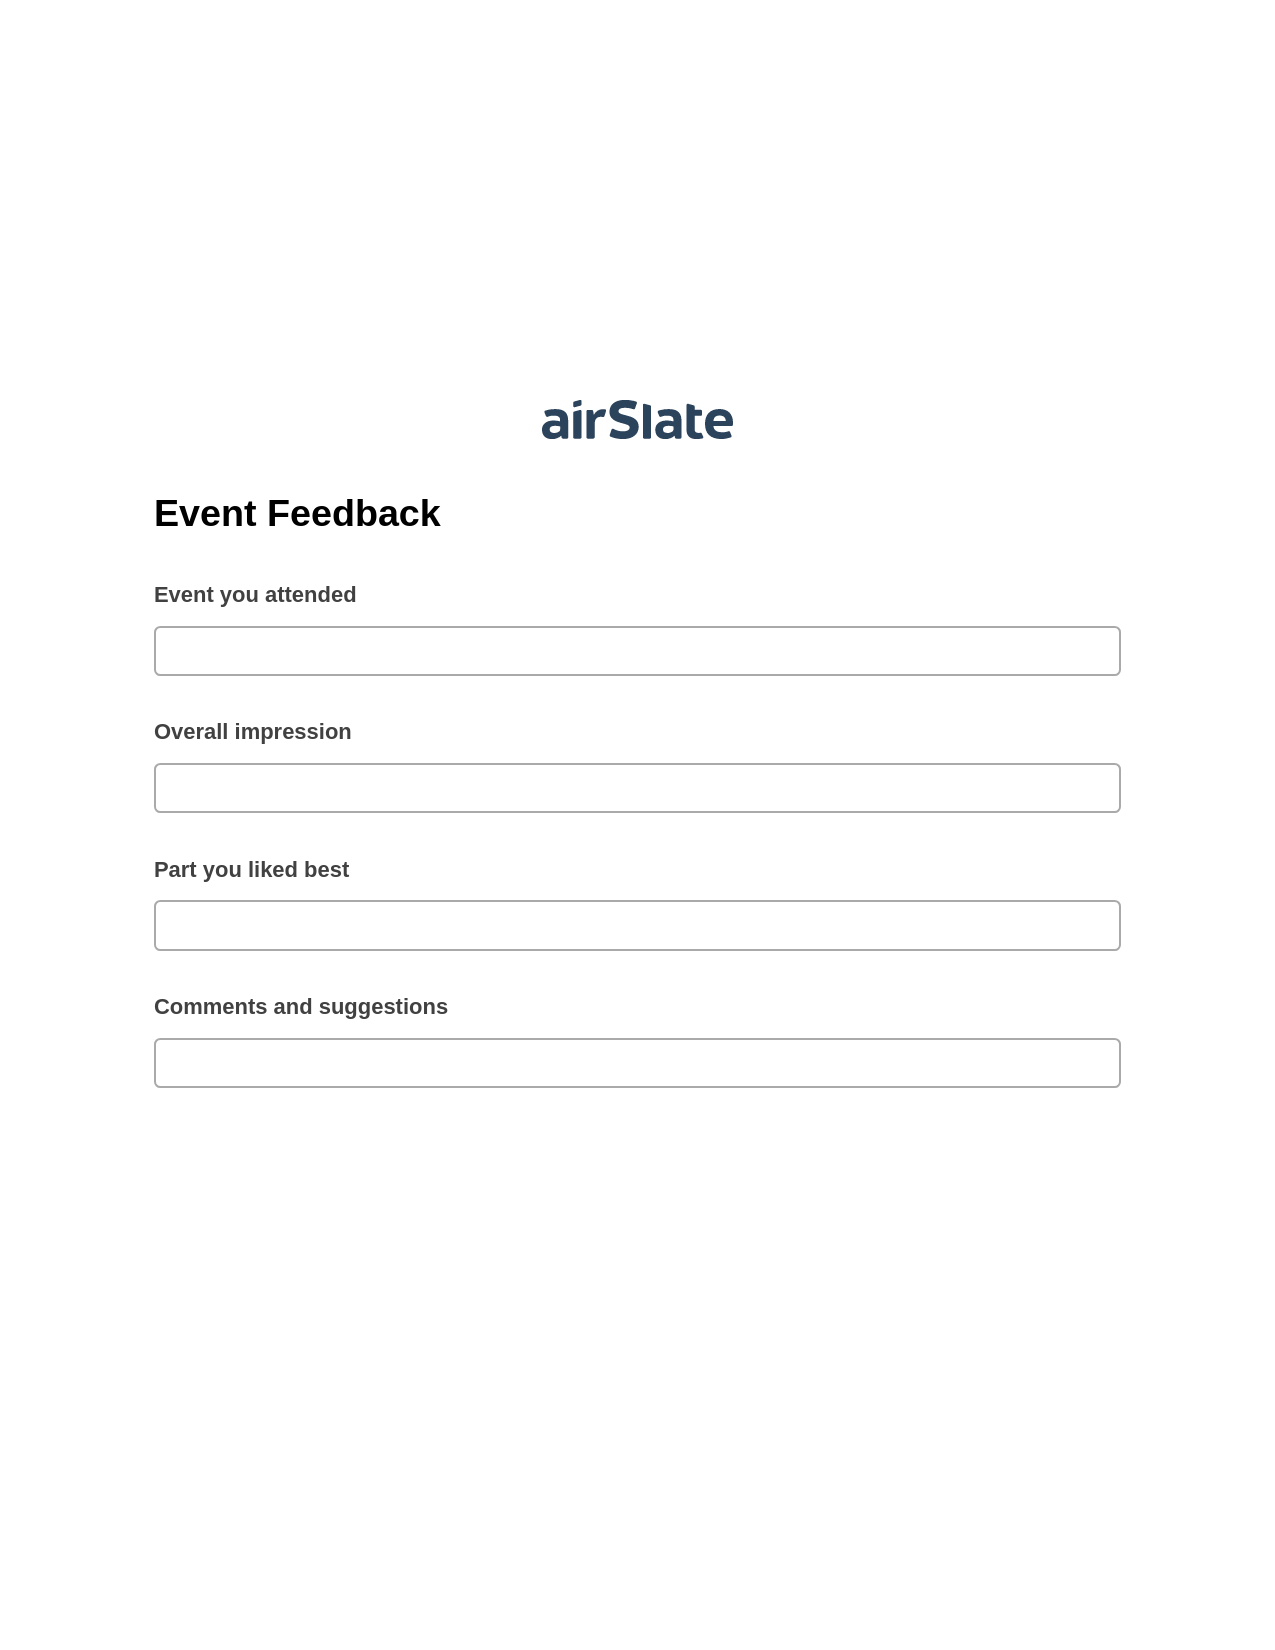 Event Feedback Pre-fill from another Slate Bot, Lock the slate bot, Export to Smartsheet